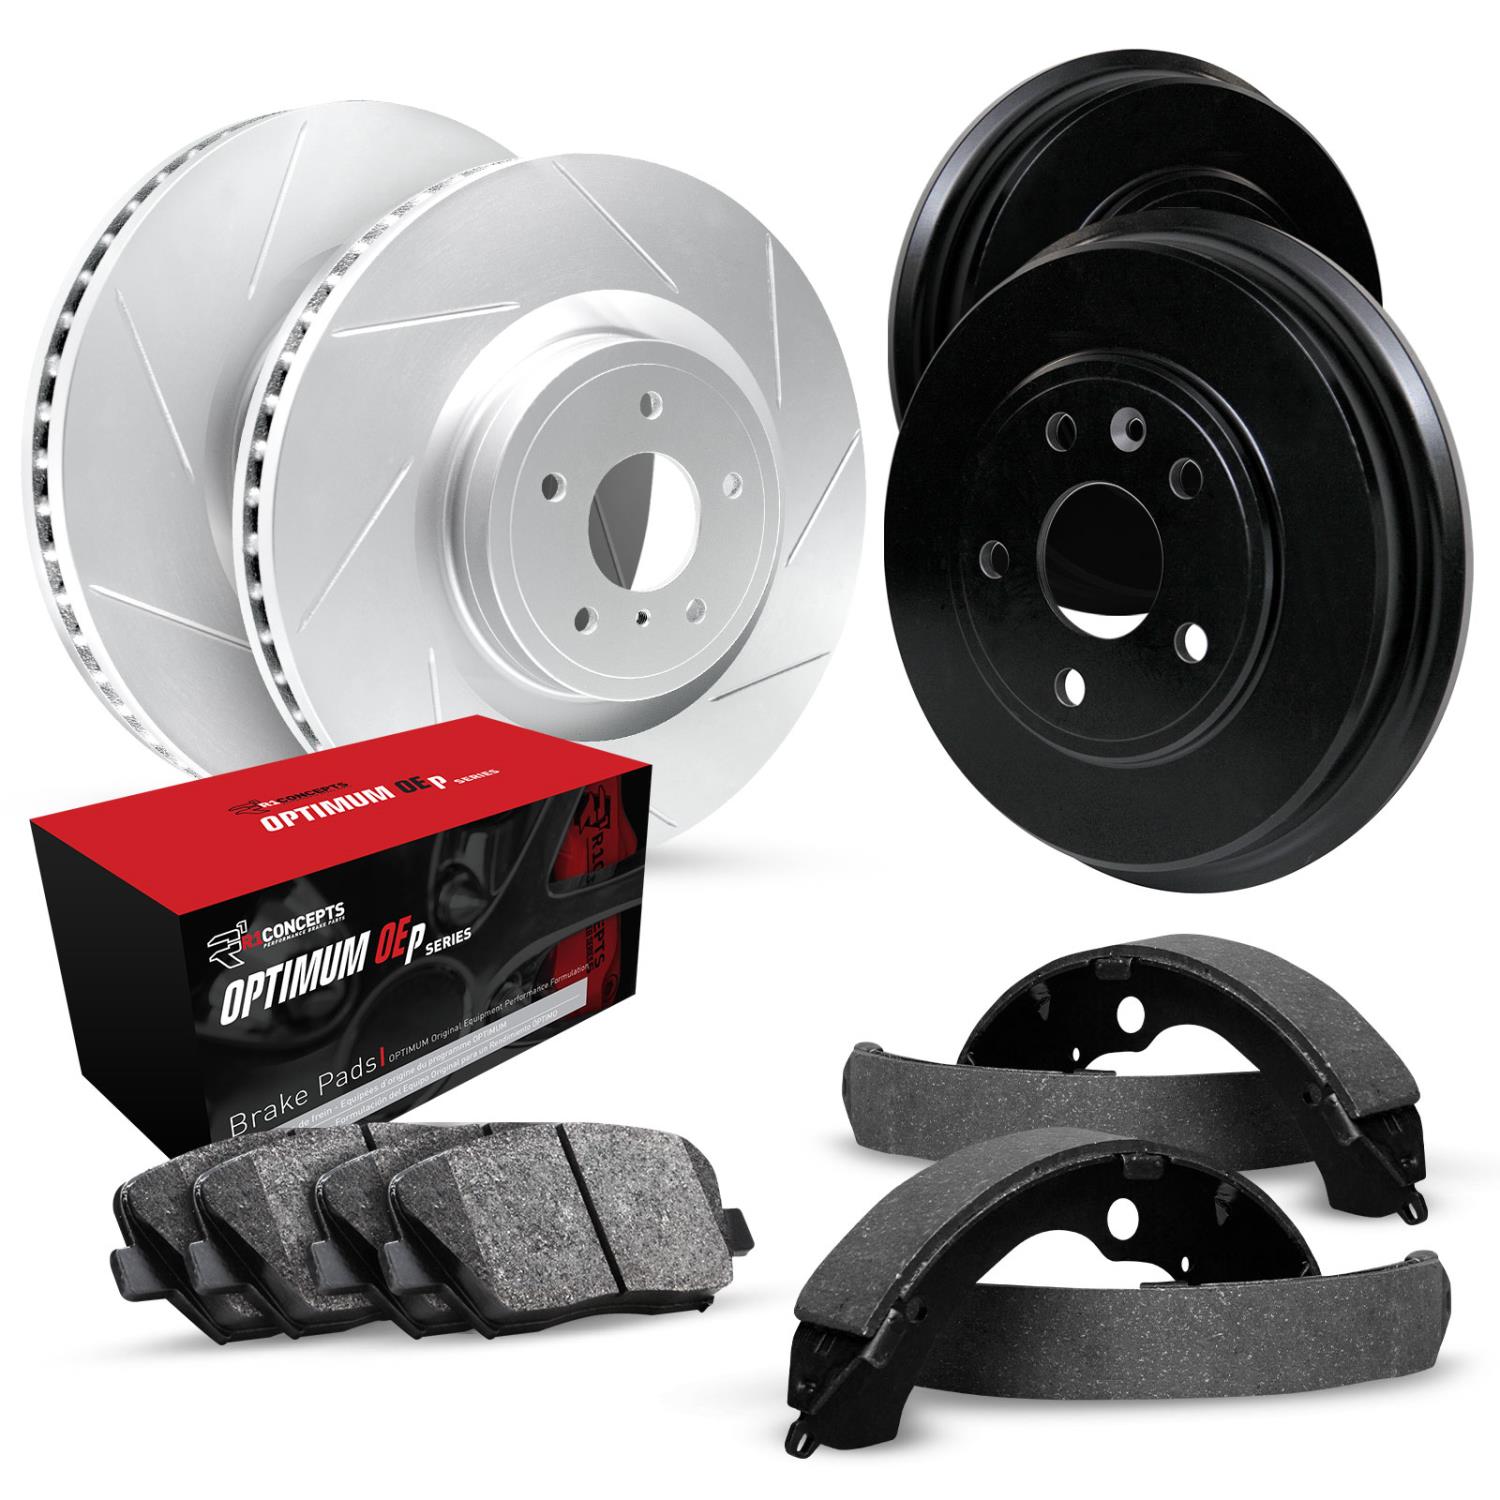 GEO-Carbon Slotted Brake Rotor & Drum Set w/Optimum OE Pads & Shoes, 1973-1973 GM, Position: Front & Rear